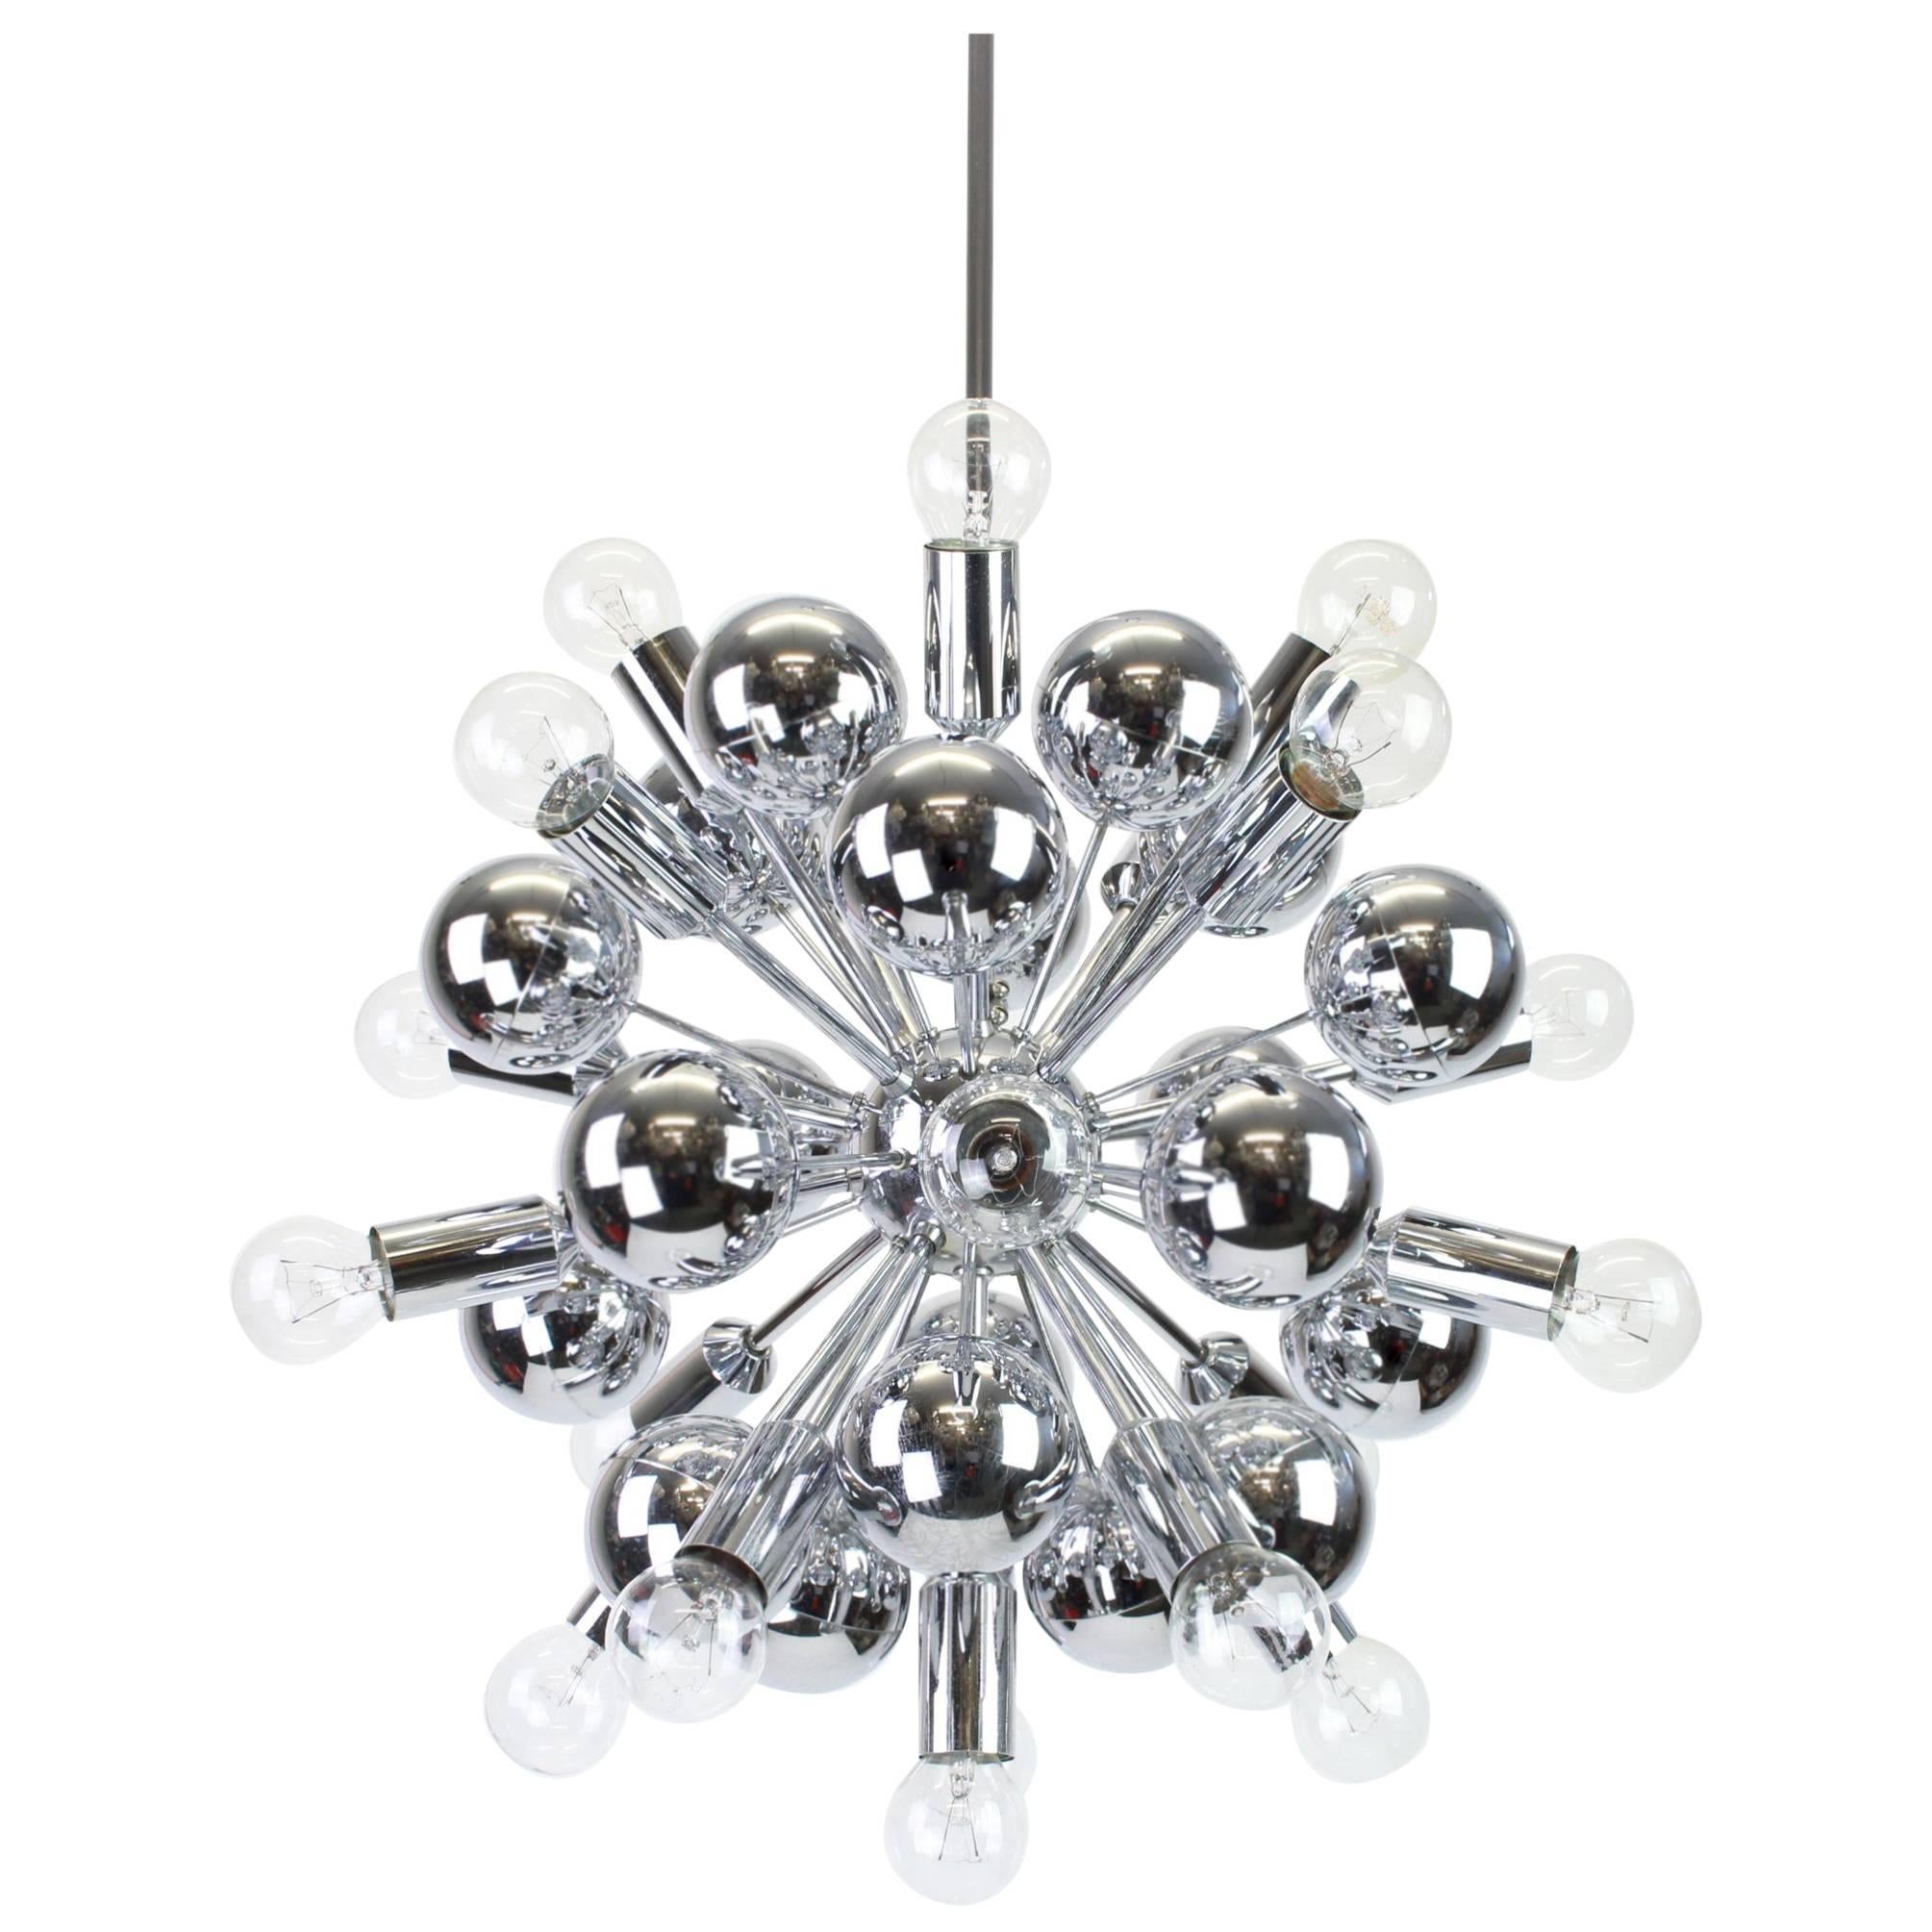 1 of 2 Exclusive silver Sputnik pendant lamp designed by Cosack during the 1970s.

Sockets: It needs 21 x E14 small bulb and compatible with the US, UK, etc.. standards
Dimensions:
Diameter 16